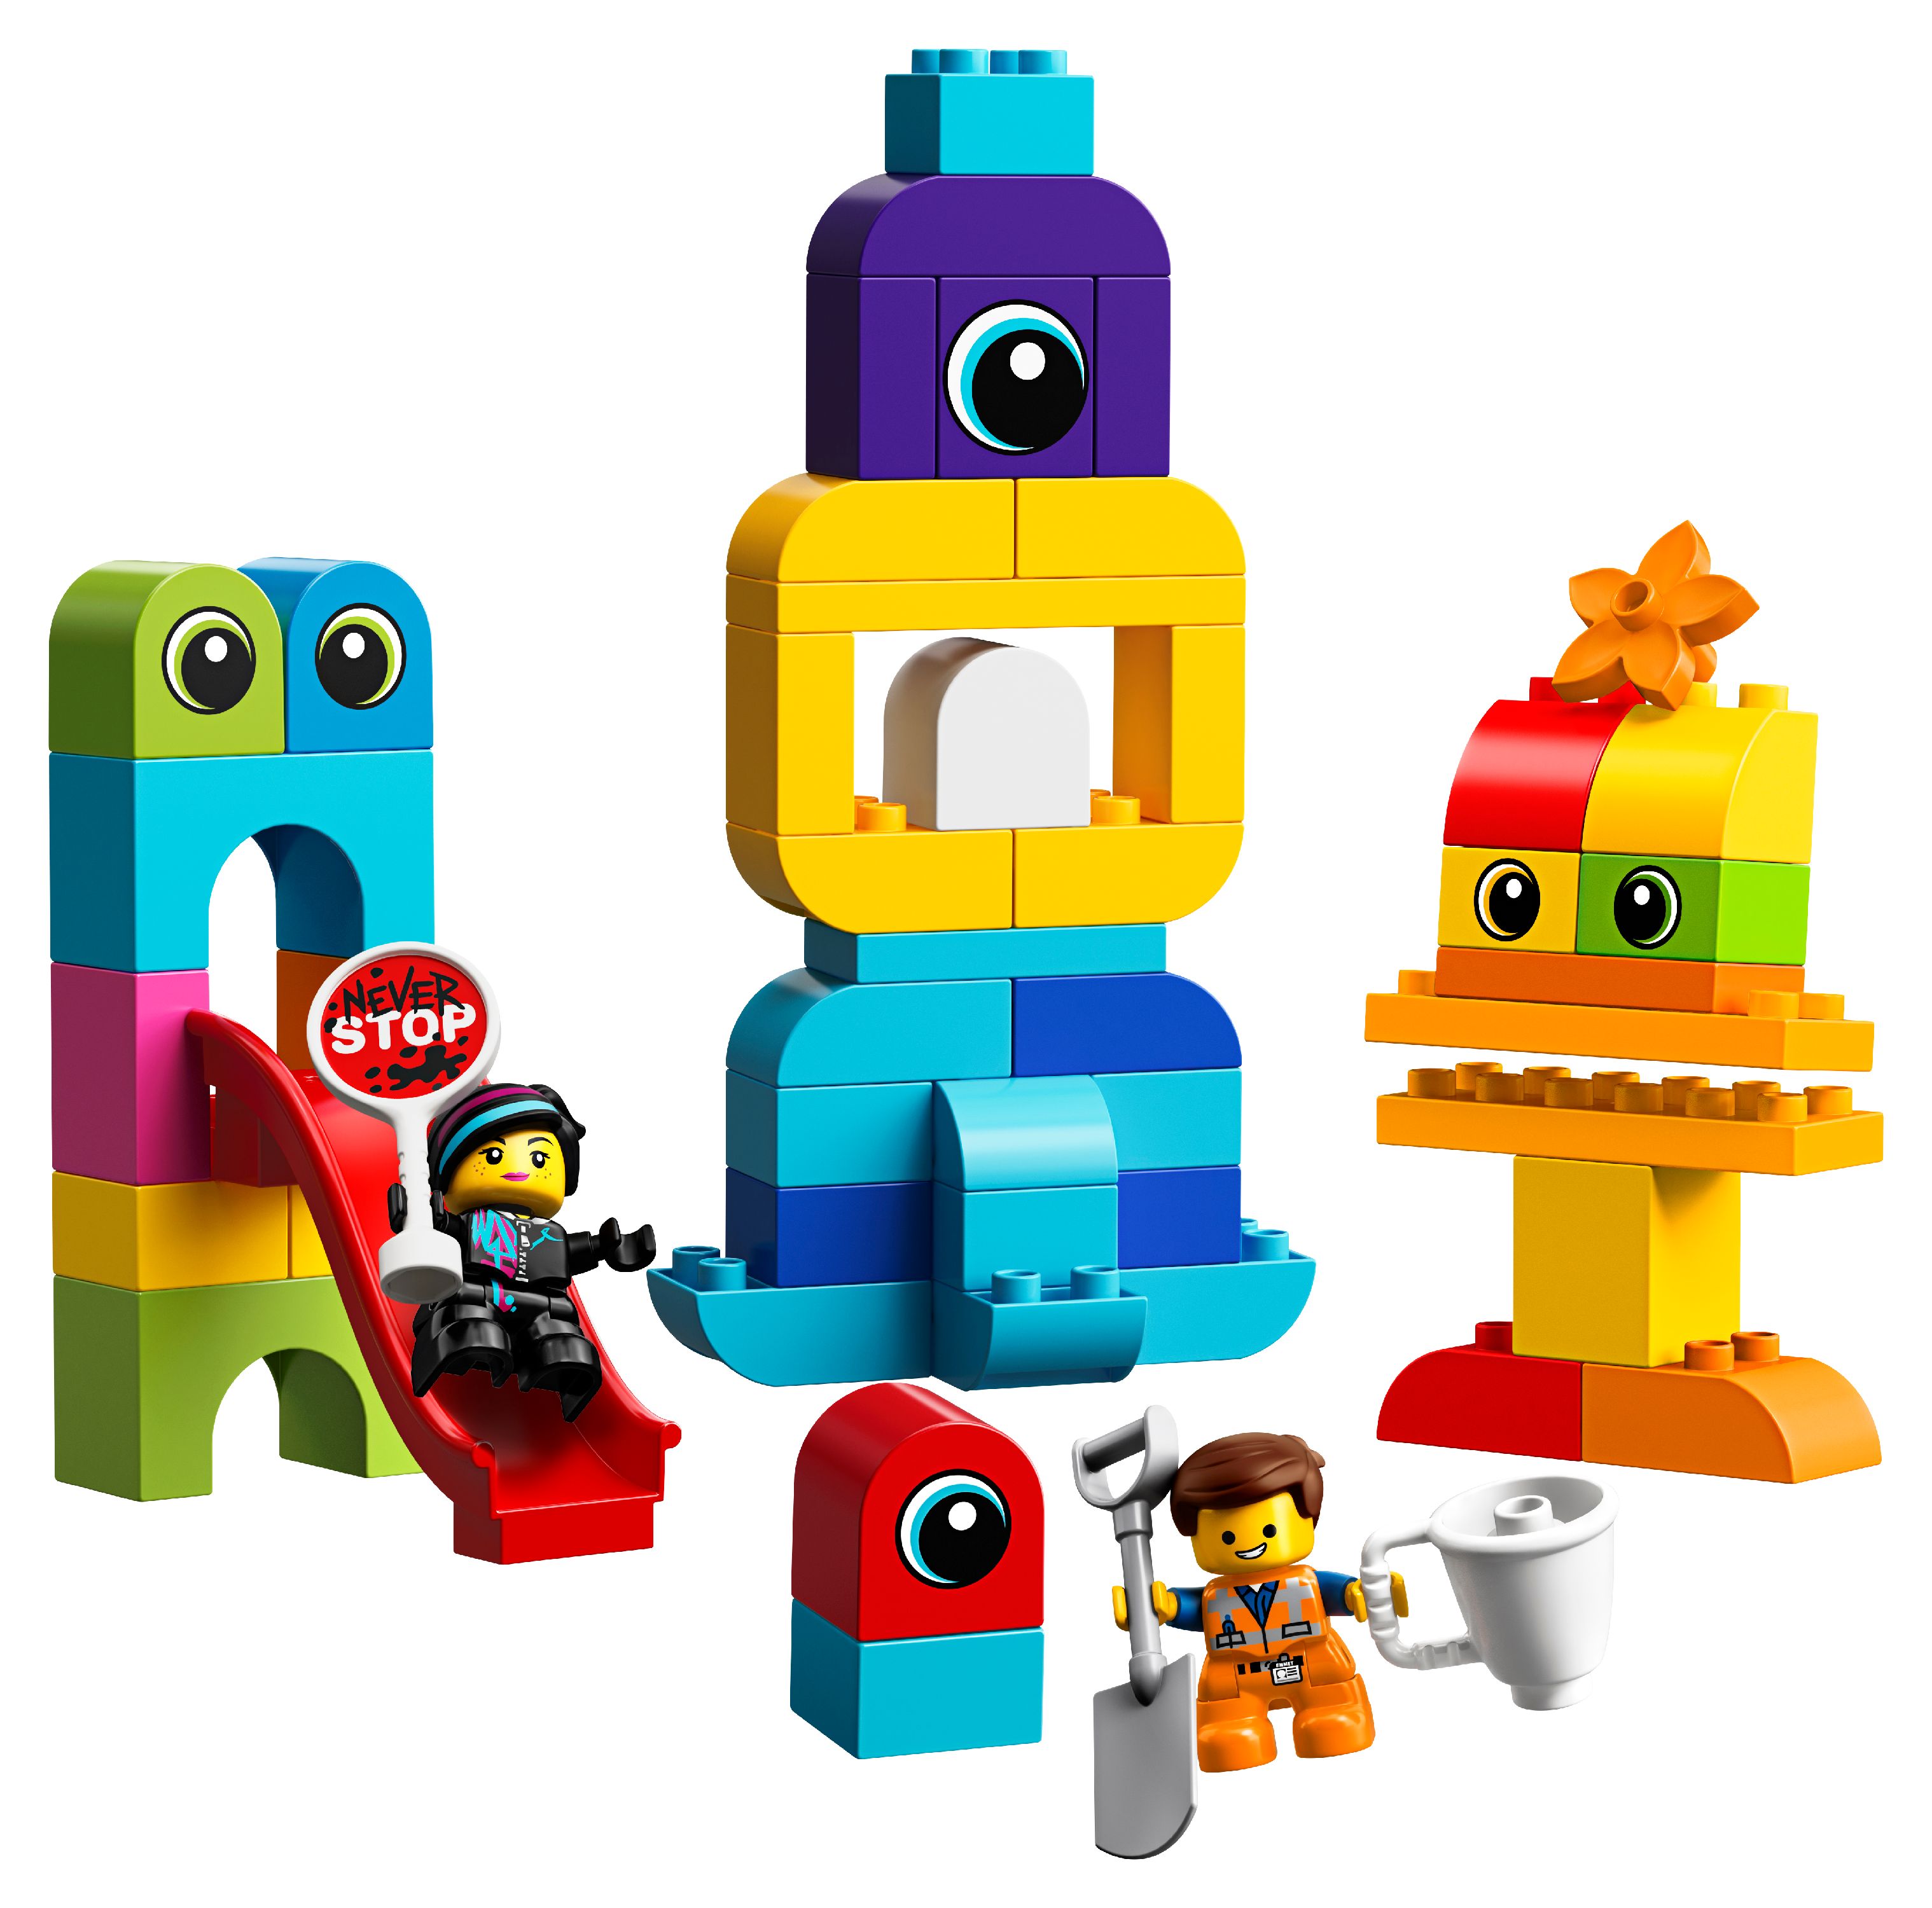 LEGO DUPLO Movie 2 Emmet and Lucy's Visitors from the DUPLO 10895 - image 3 of 8